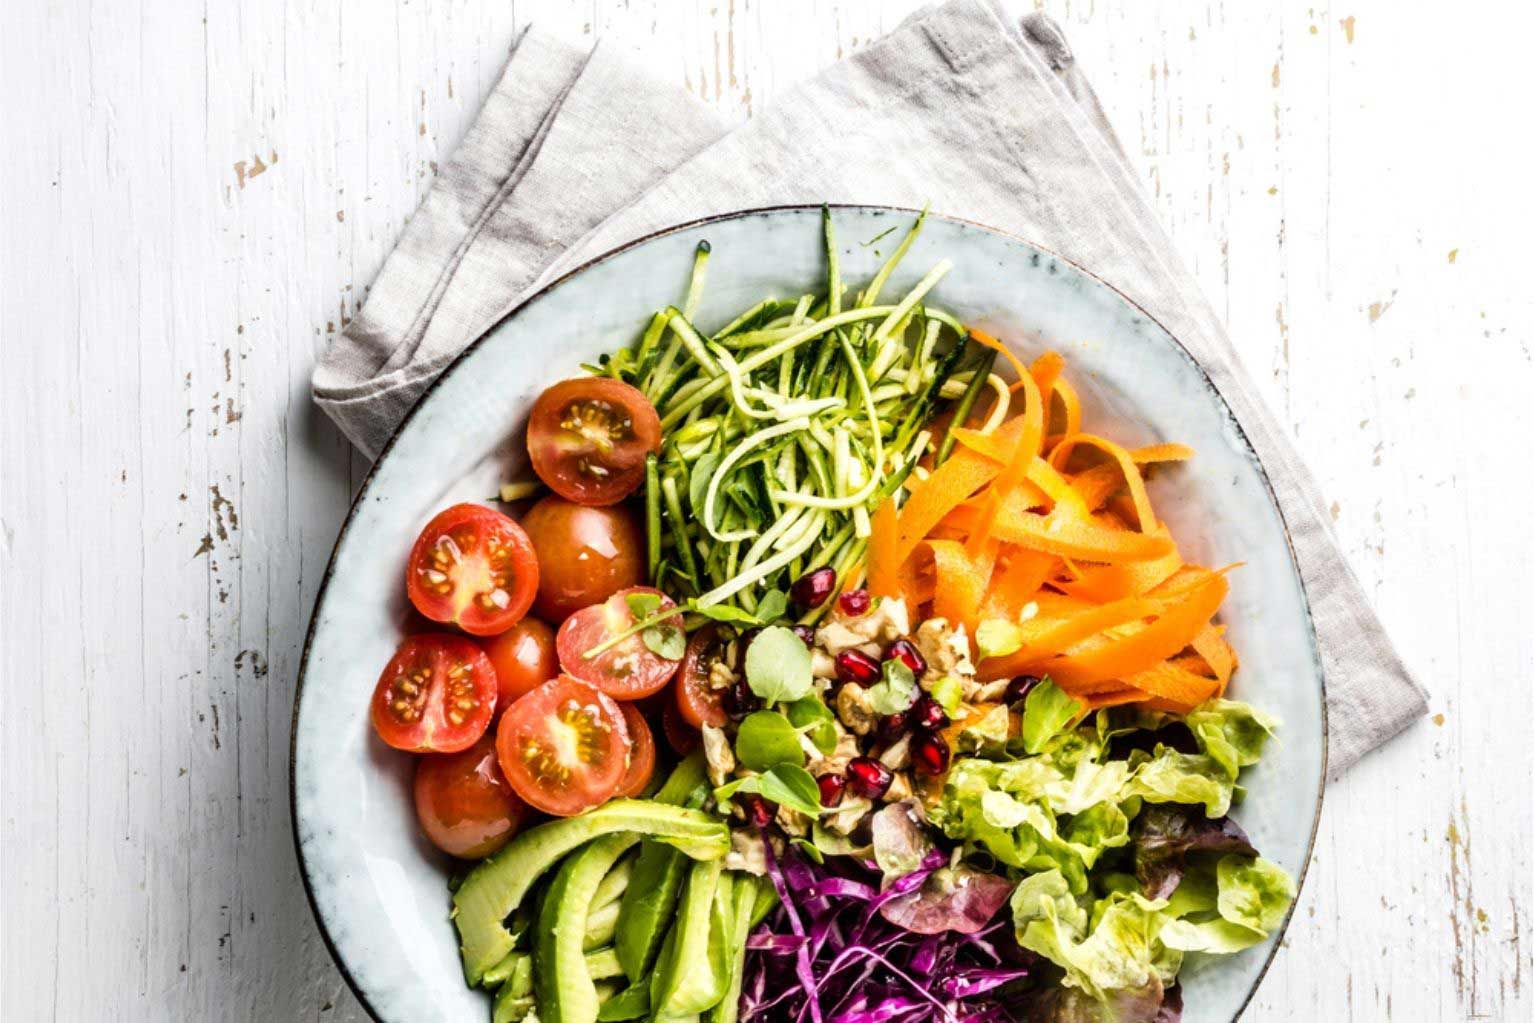 healthy salad with avocado, tomatoes, bell peppers, and fresh vegetables in a bowl